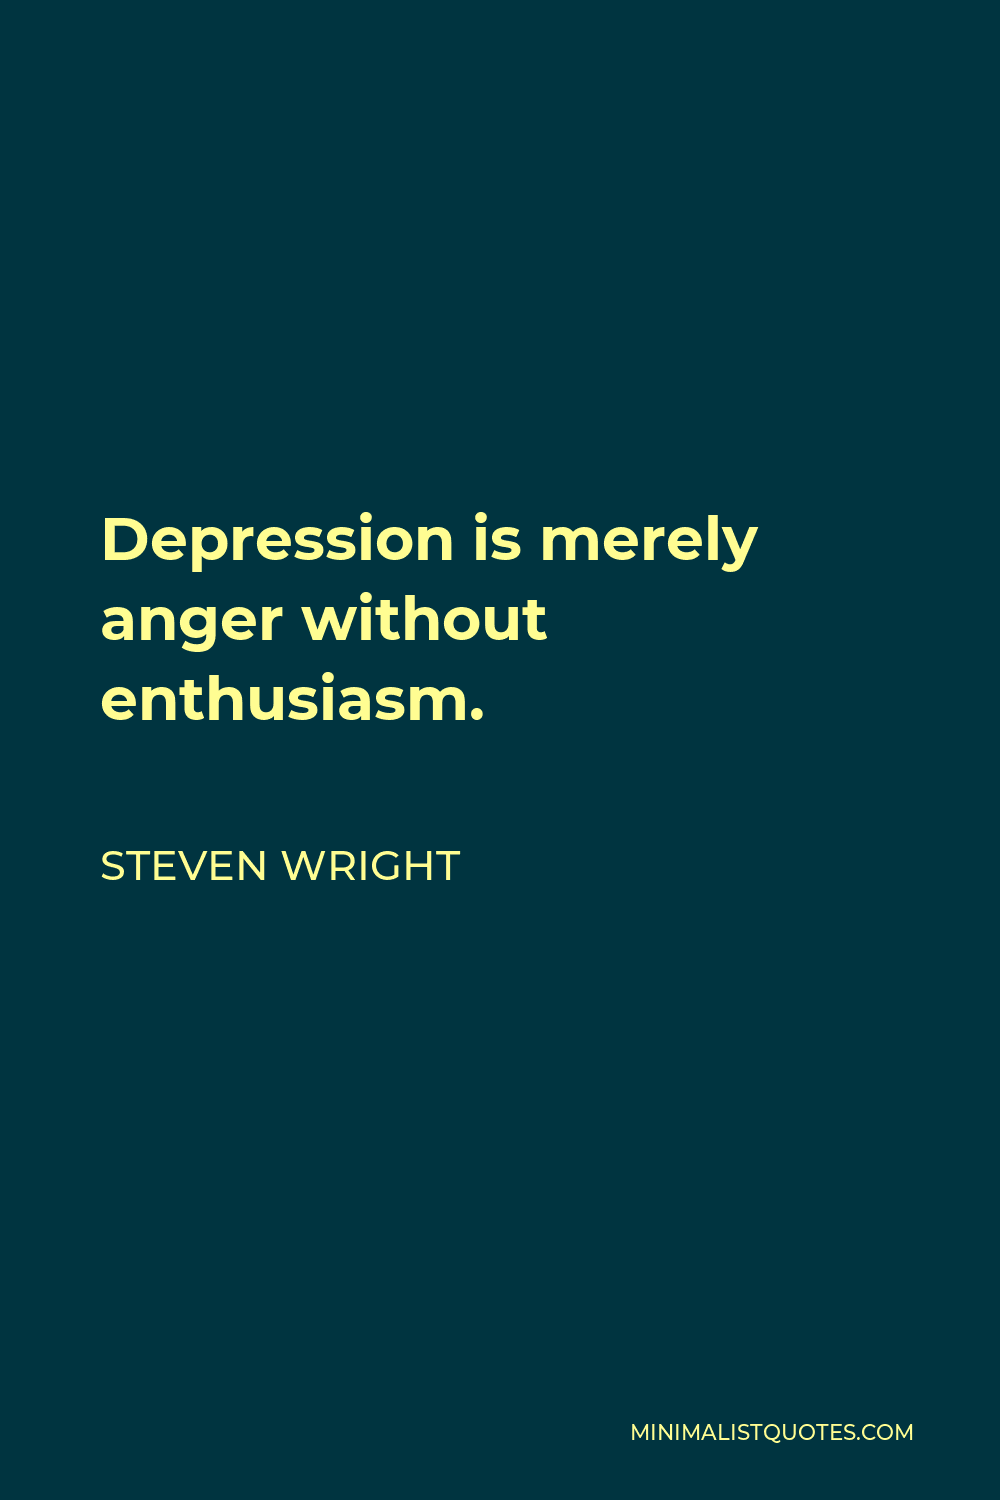 Steven Wright Quote - Depression is merely anger without enthusiasm.